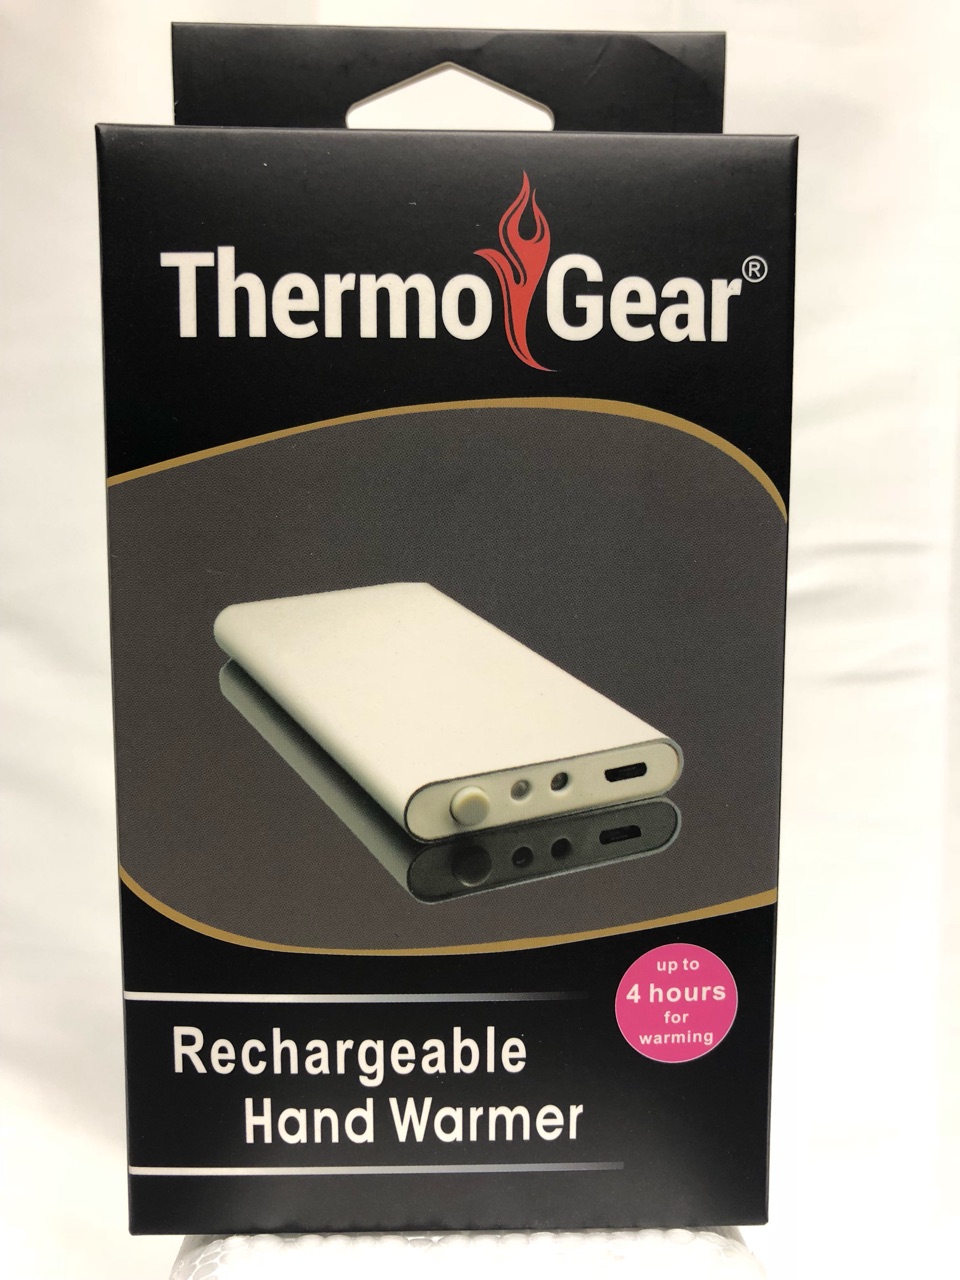 THERMO GEAR Slim Rechargeable Hand Warmer - image 4 of 4